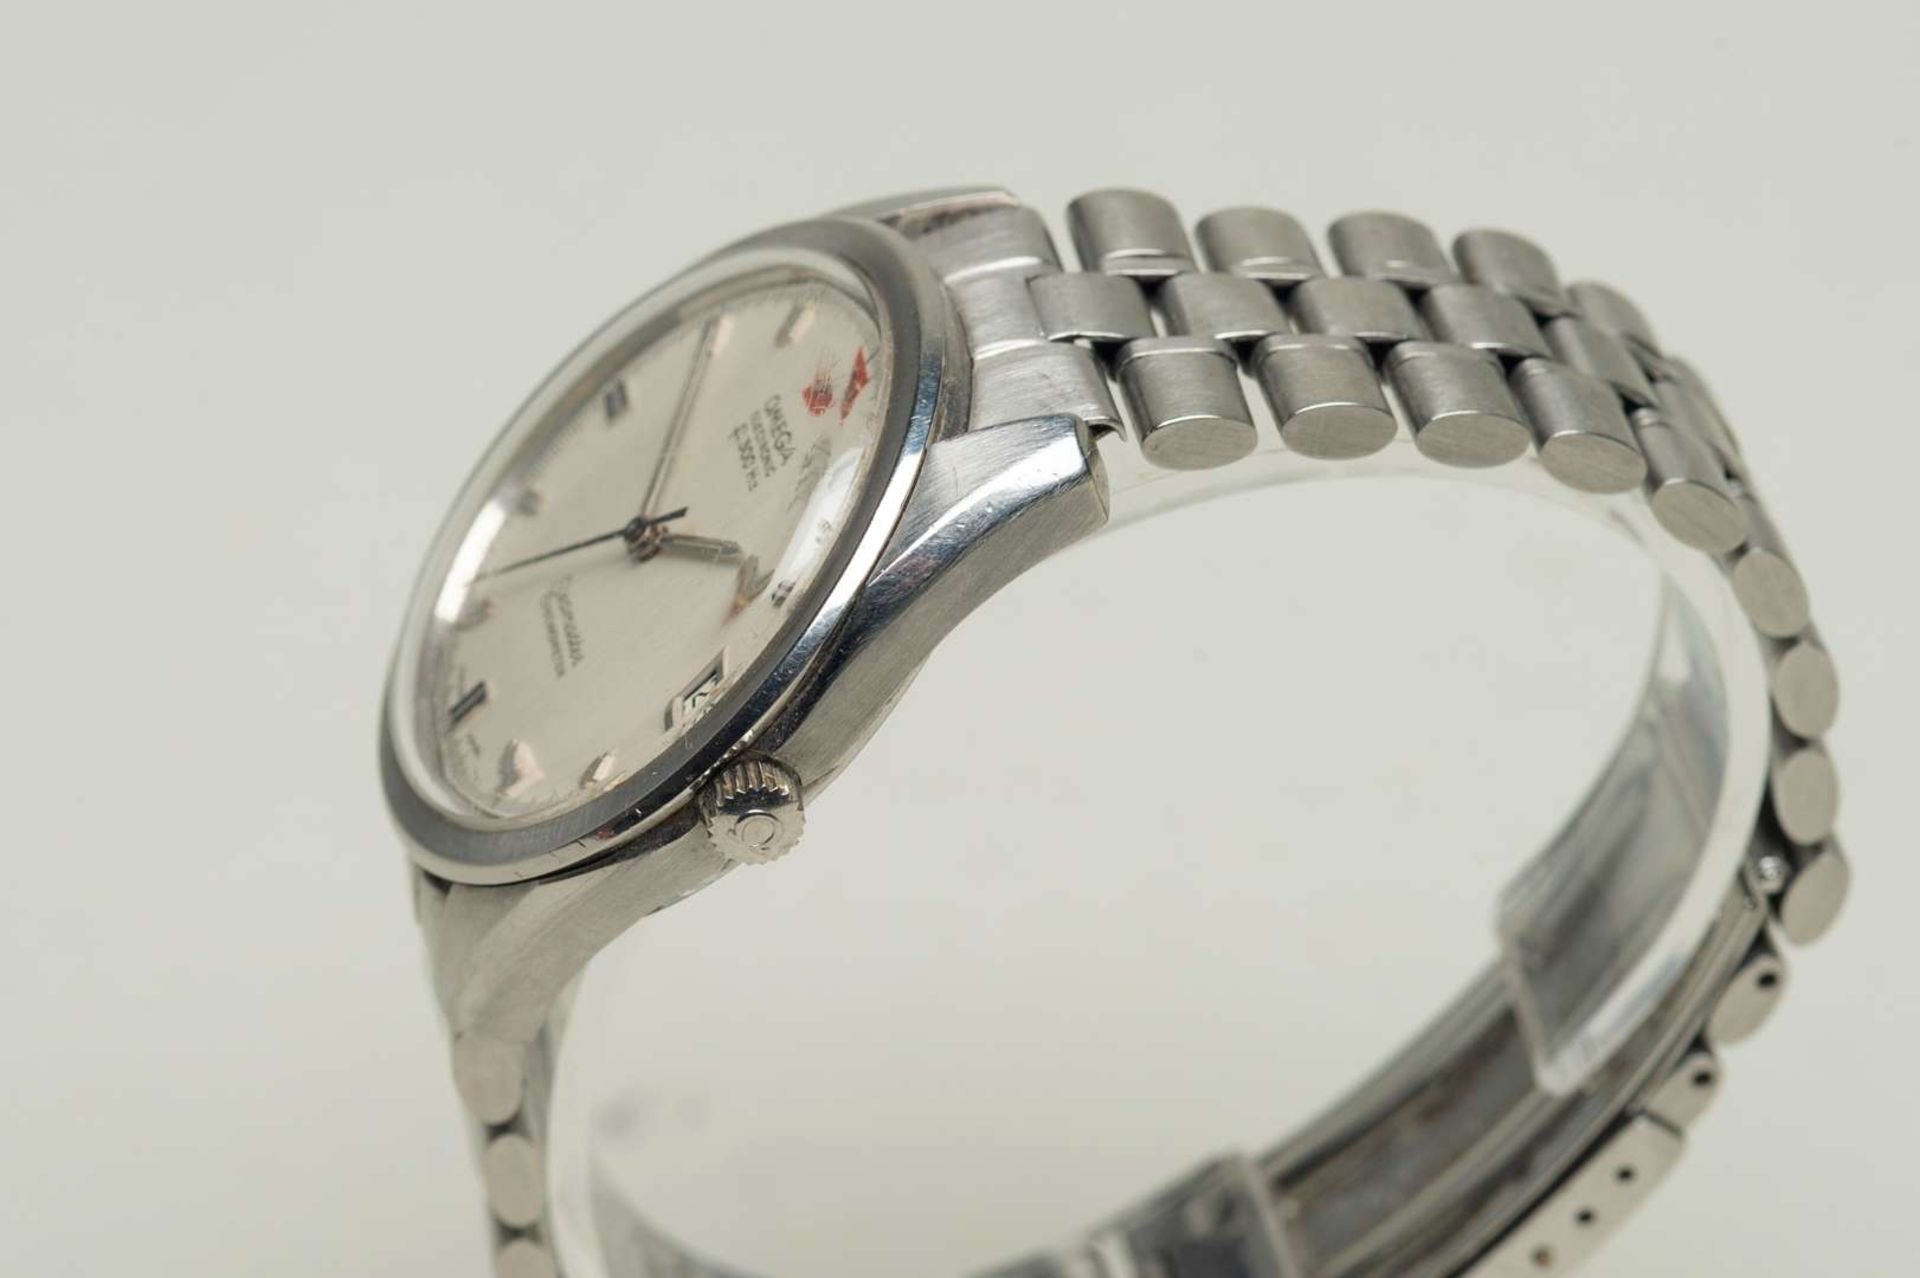 OMEGA. 1970's Seamaster, Chronometer, Electronic f300 Hz, stainless steel calendar wristwatch. - Image 2 of 6